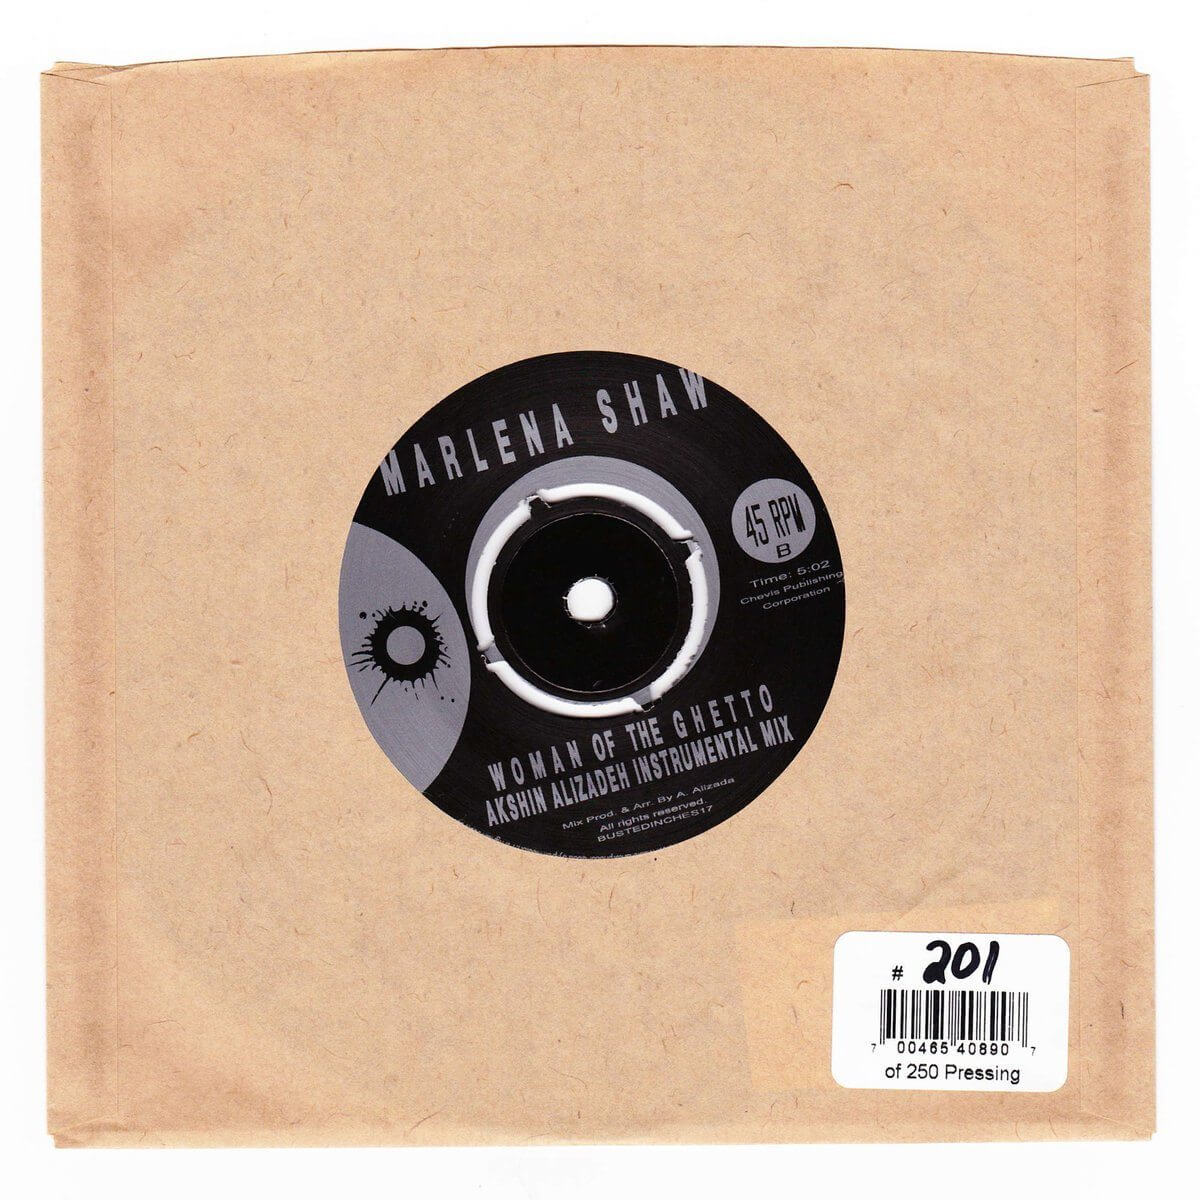 Marlena Shaw - Woman of the Ghetto (Akshin Alizadeh Mixes) - Limited Edition Black 7 Inch Vinyl (2nd Pressing) - Cold Busted